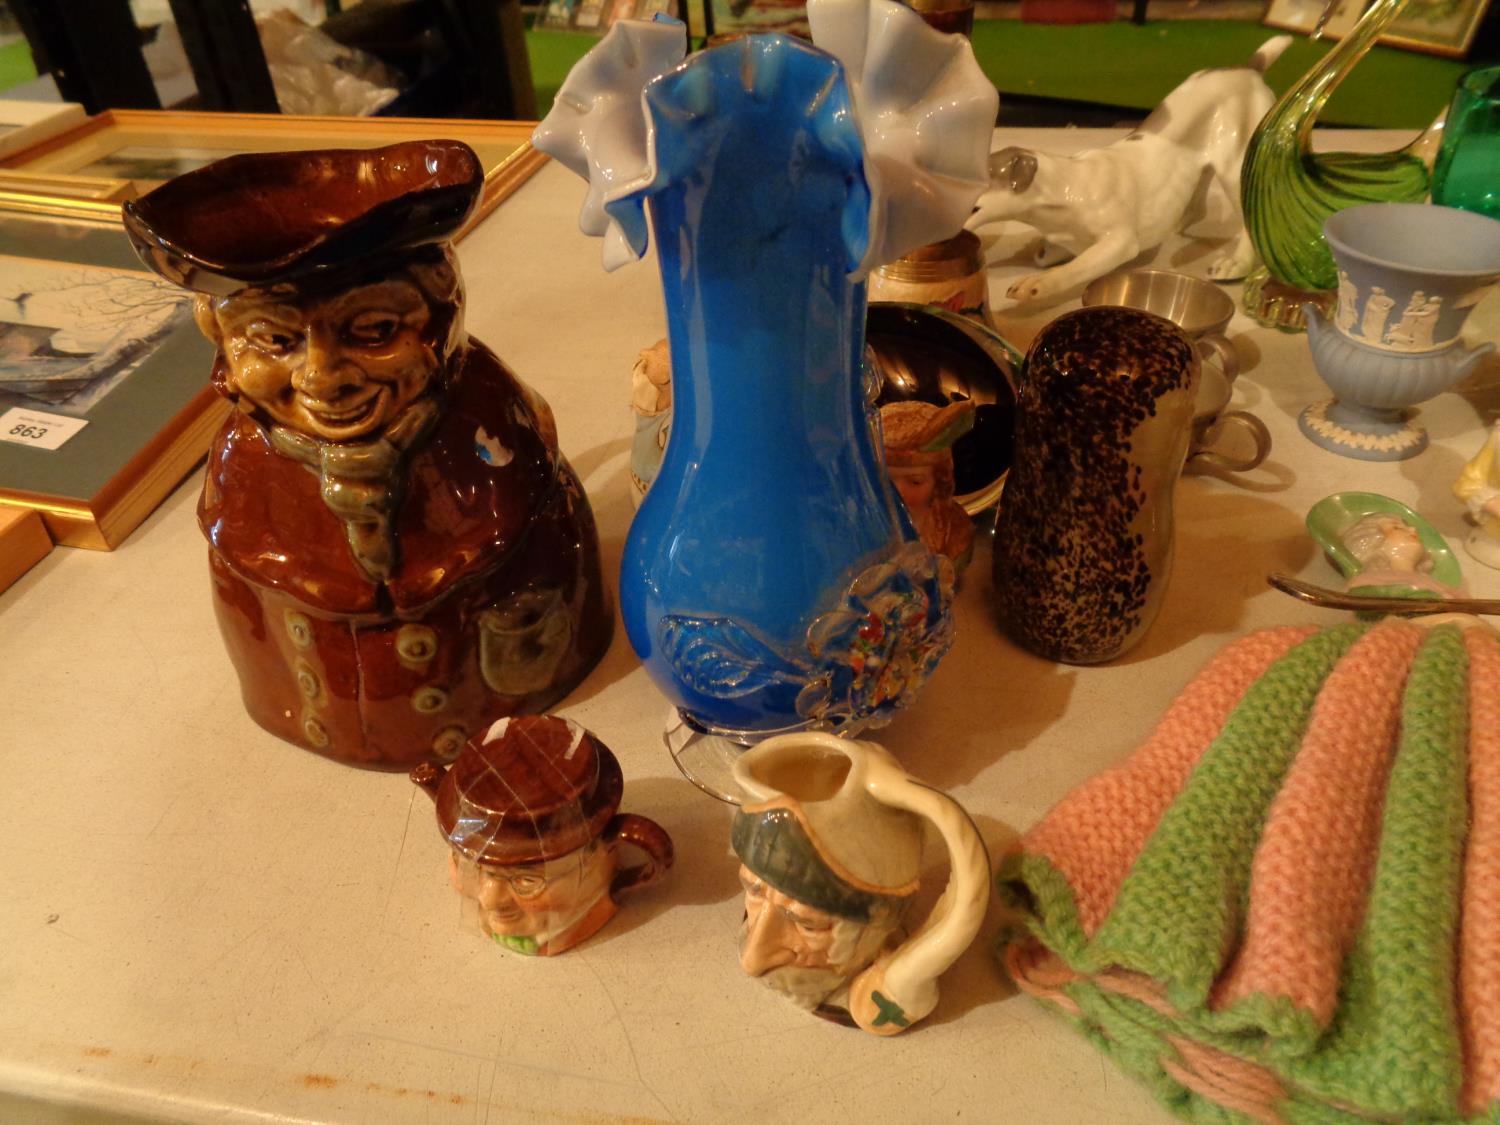 A MIXED SELECTION OF ITEMS TO INCLUDE SMALL VASES, A TRINKET TRAY AND SOME CERAMIC ITEMS - Image 2 of 5